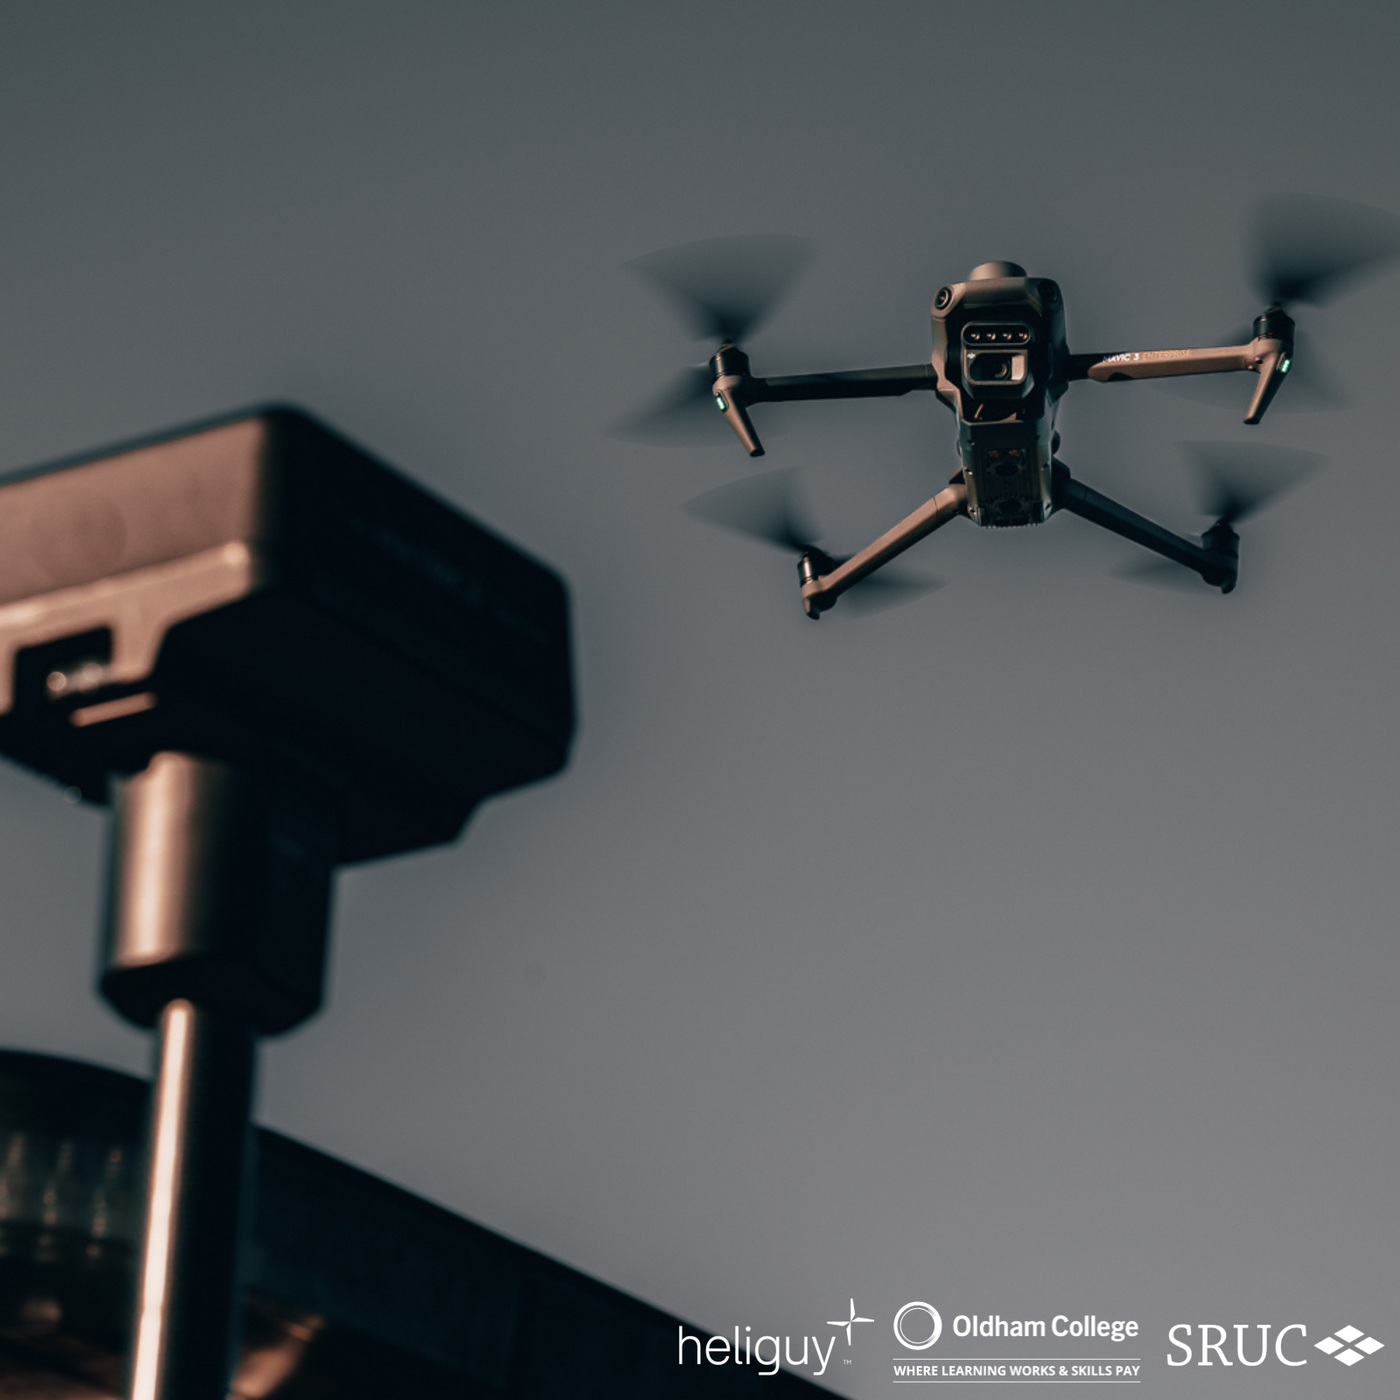 Drones For Education: heliguy™ Helping UK Colleges Adopt Drone Technology